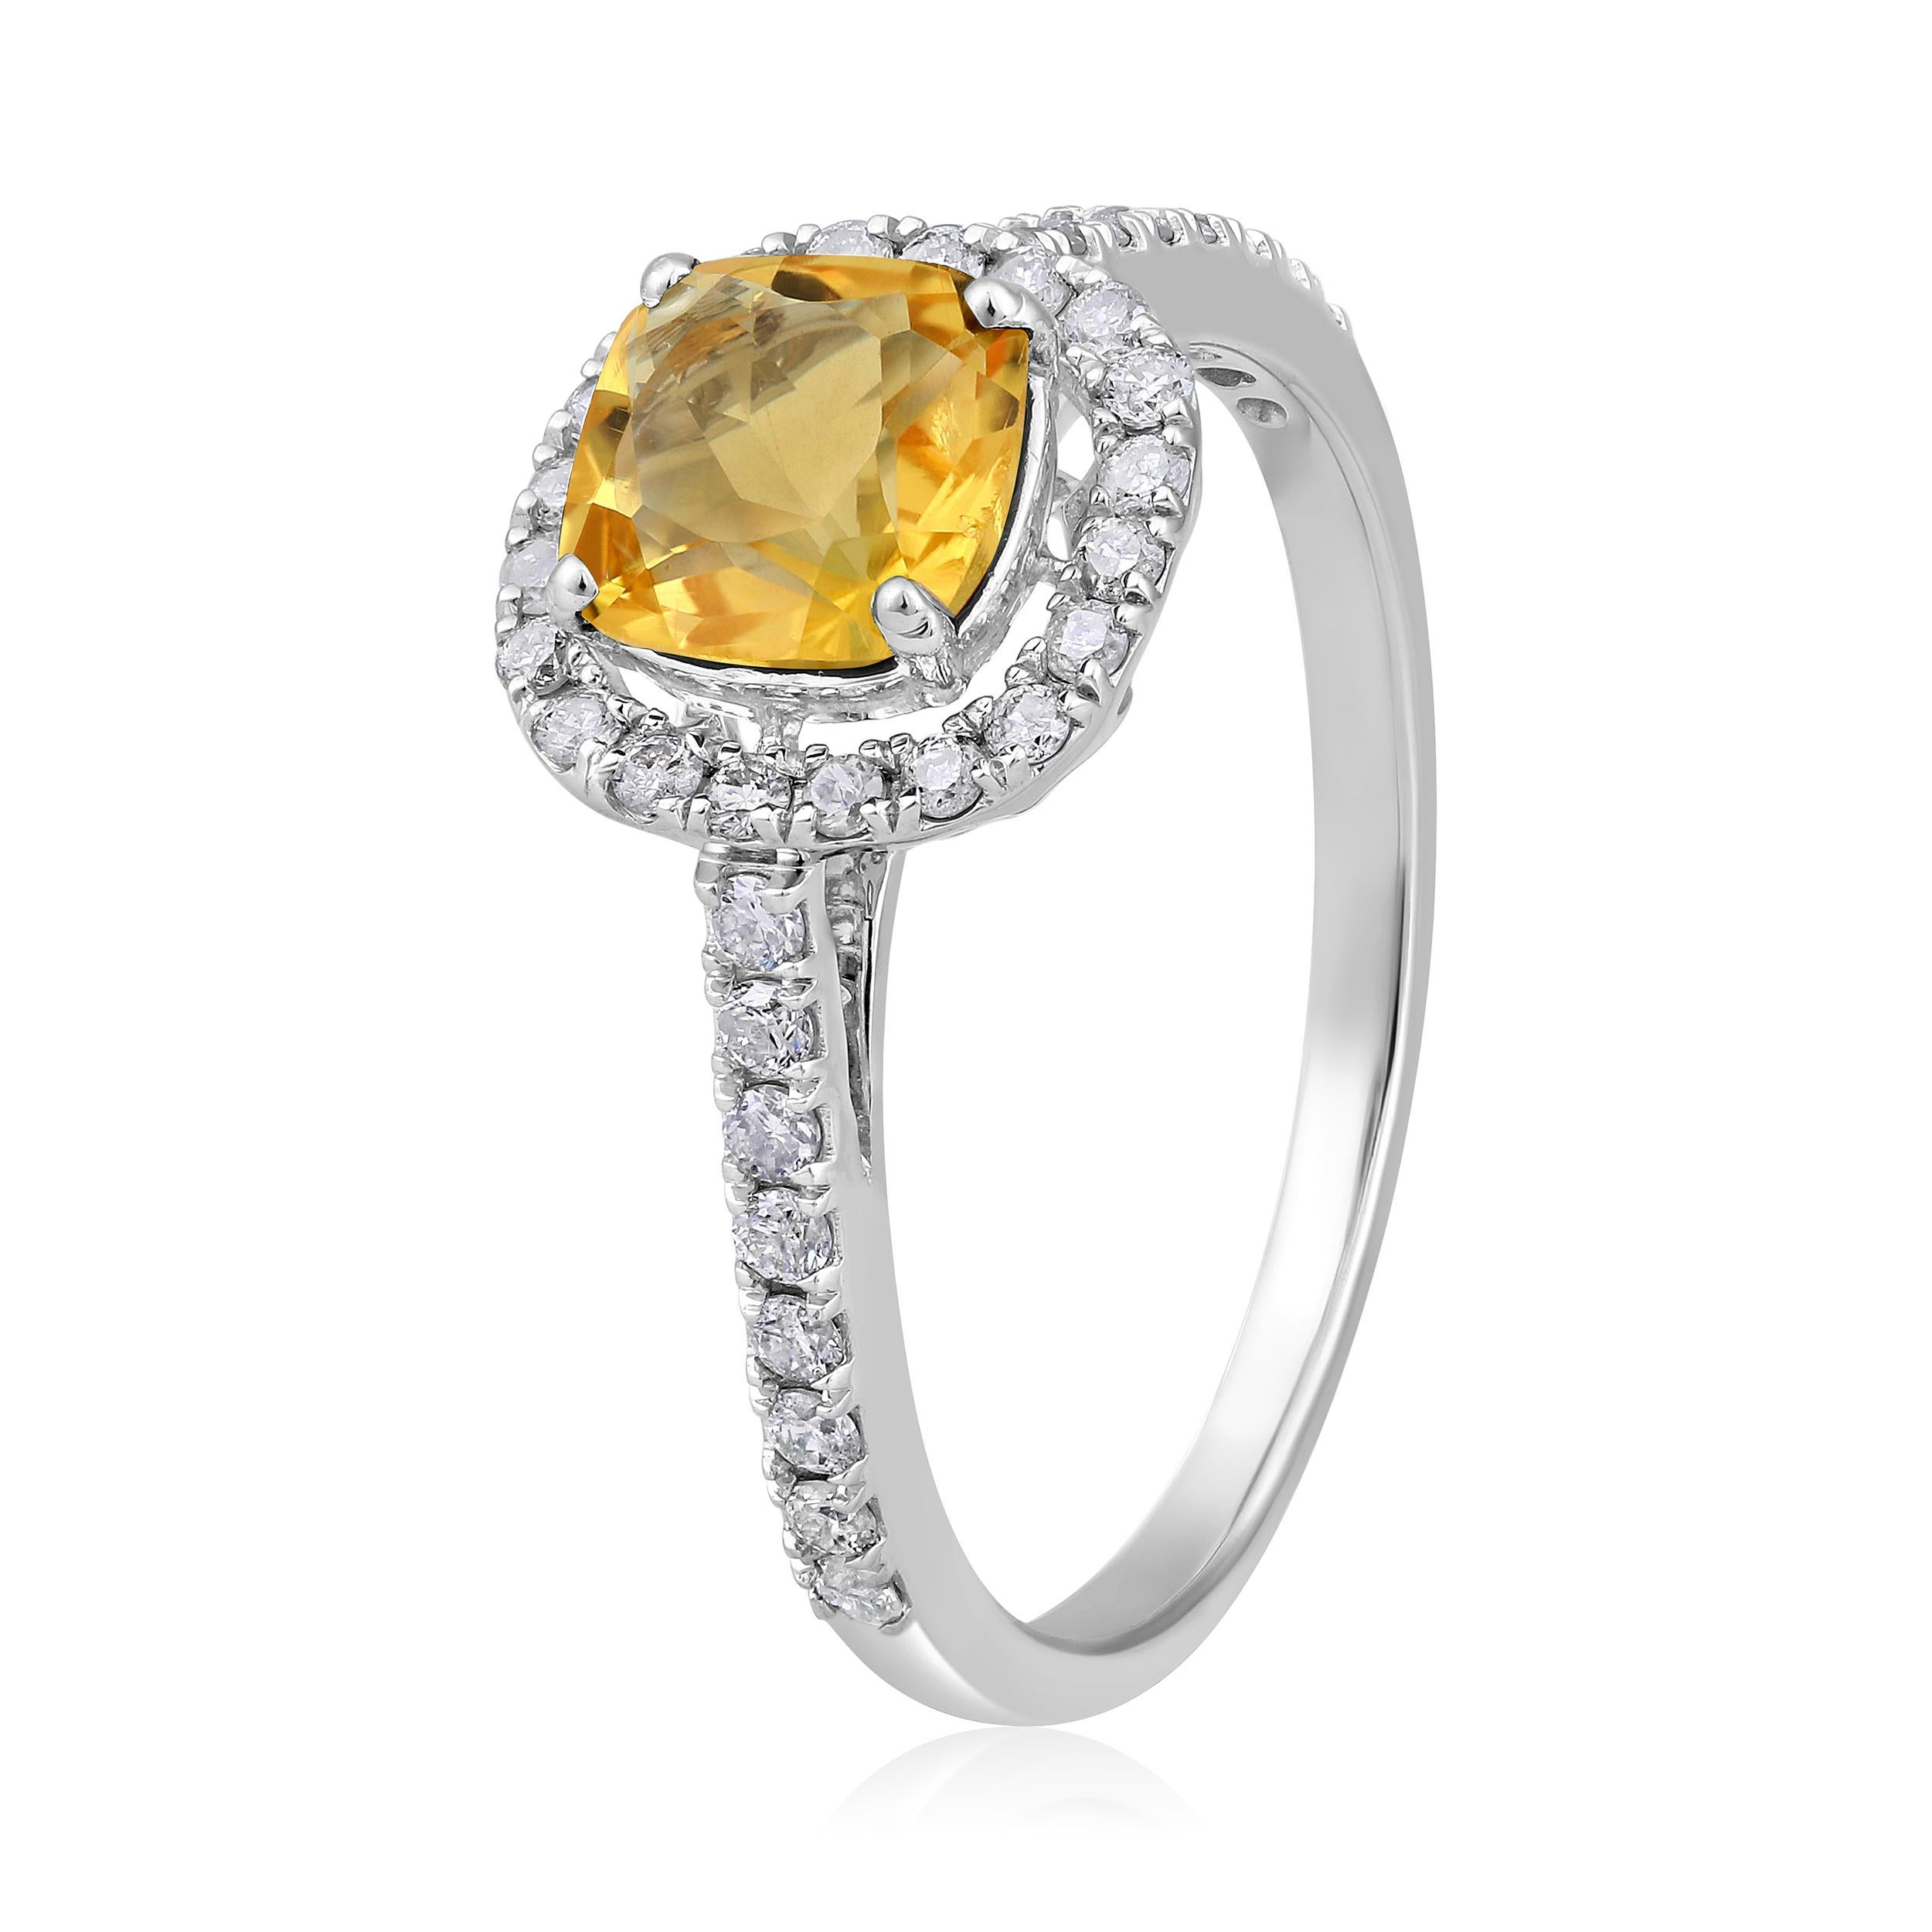 Ring Size: US 7 

Crafted in 2.02 grams of 10K White Gold, the ring contains 36 stones of Round Diamonds with a total of 0.325 carat in F-G color and I1-I2 clarity combined with 1 stone of Lab Created Citrine Gemstone with a total of 0.978